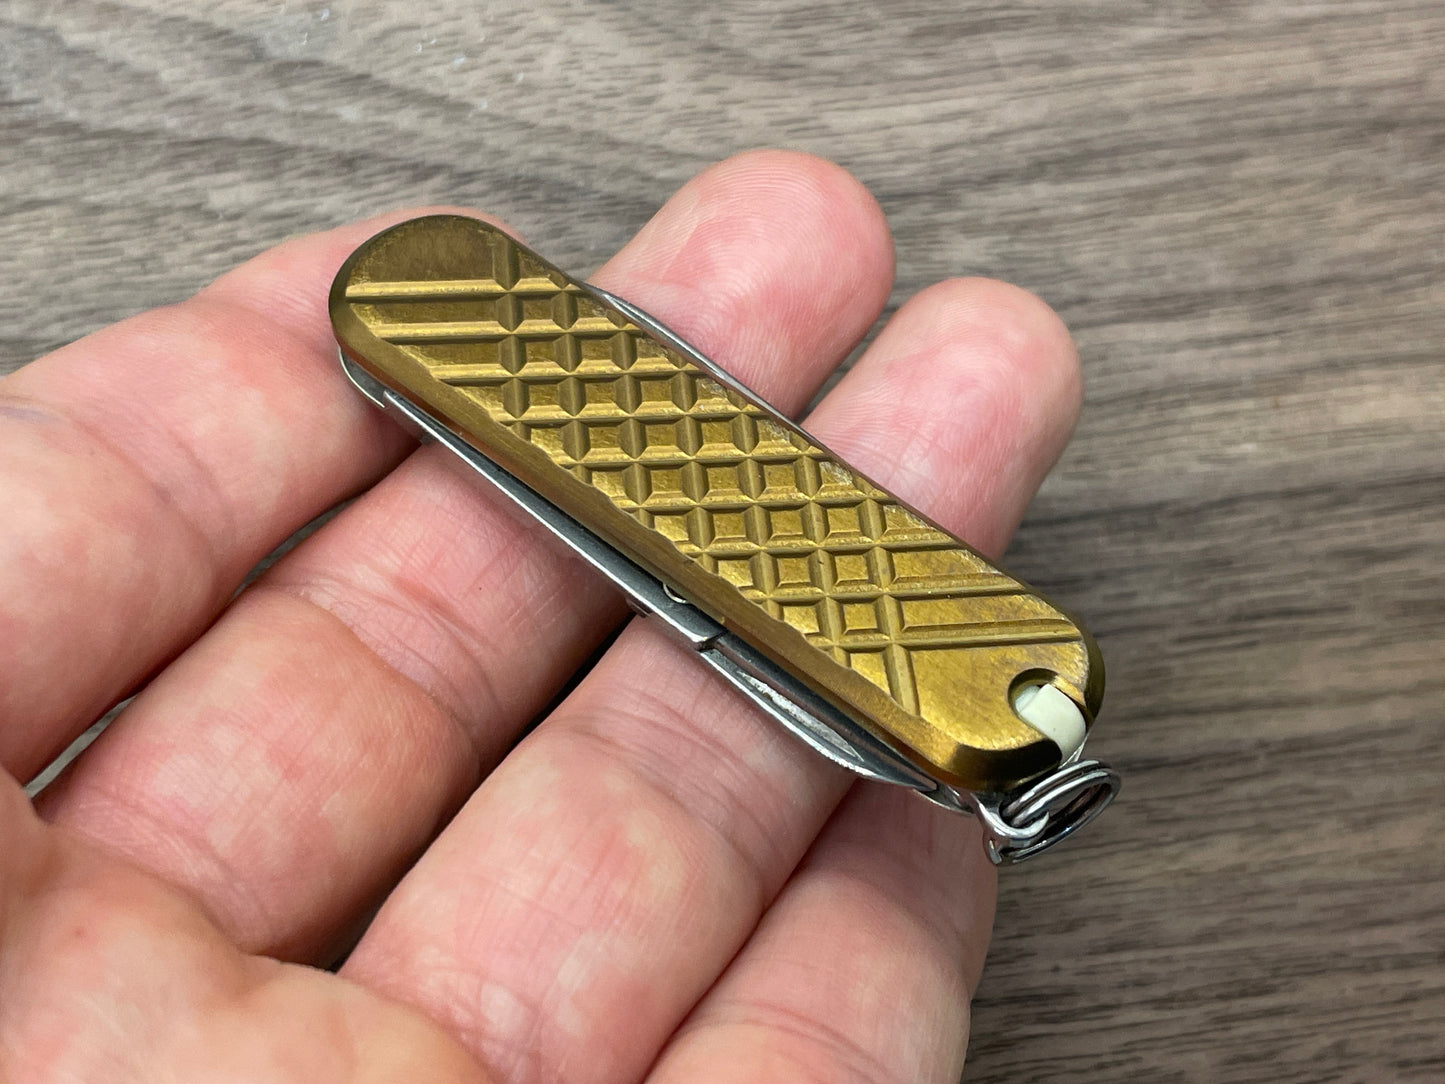 Deep brushed Bronze ano FRAG milled 58mm Titanium Scales for Swiss Army SAK